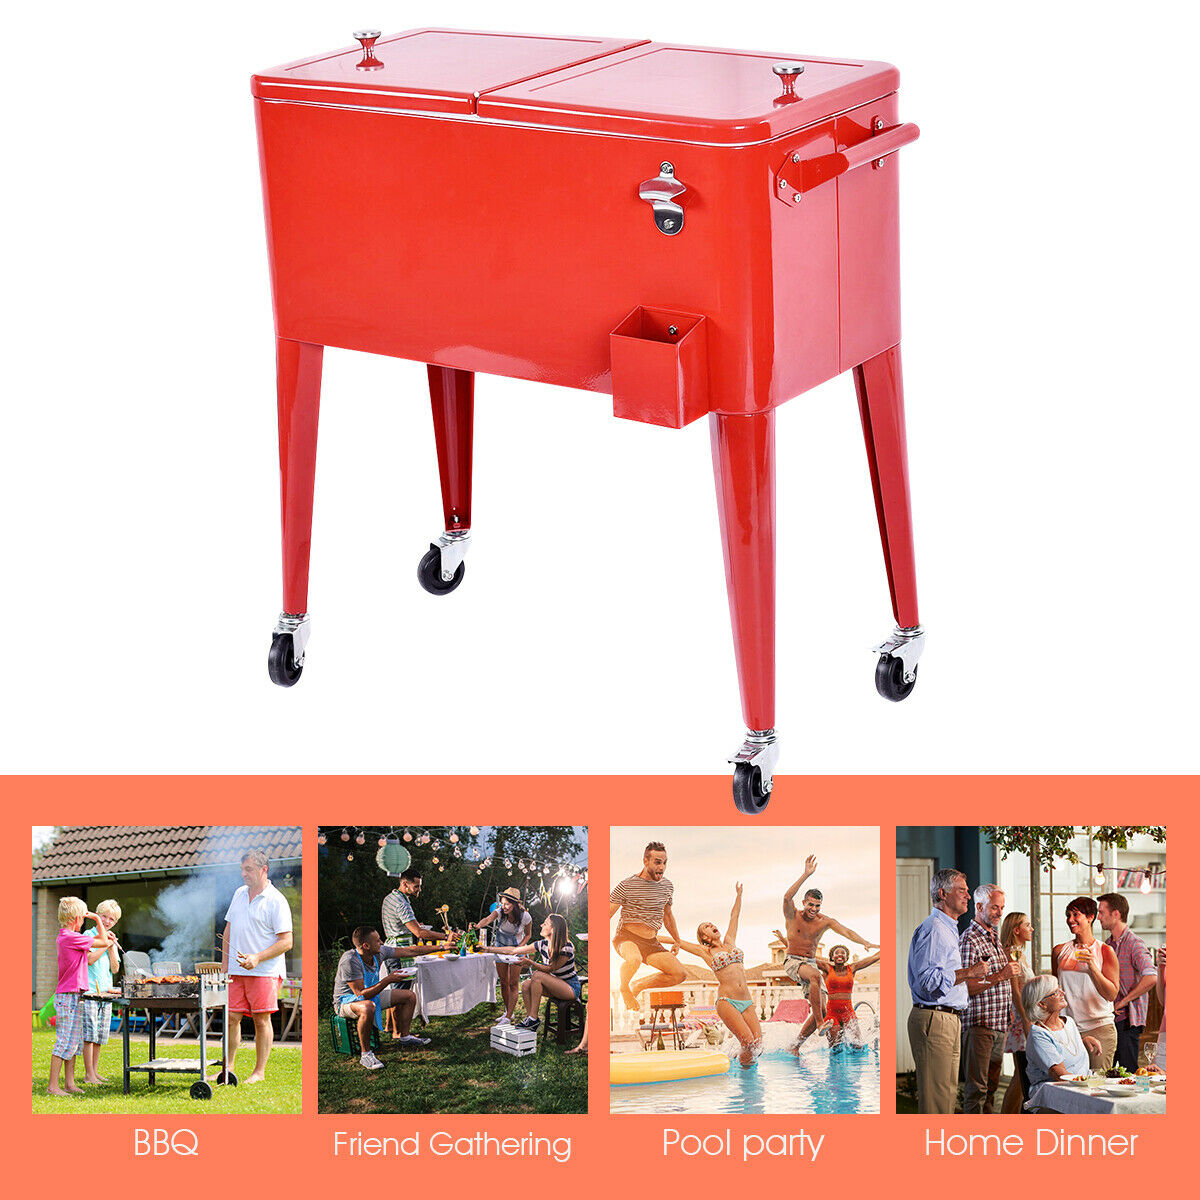 Costway Red Outdoor Patio 80 Quart Cooler Cart Ice Beer Beverage Chest Party Portable